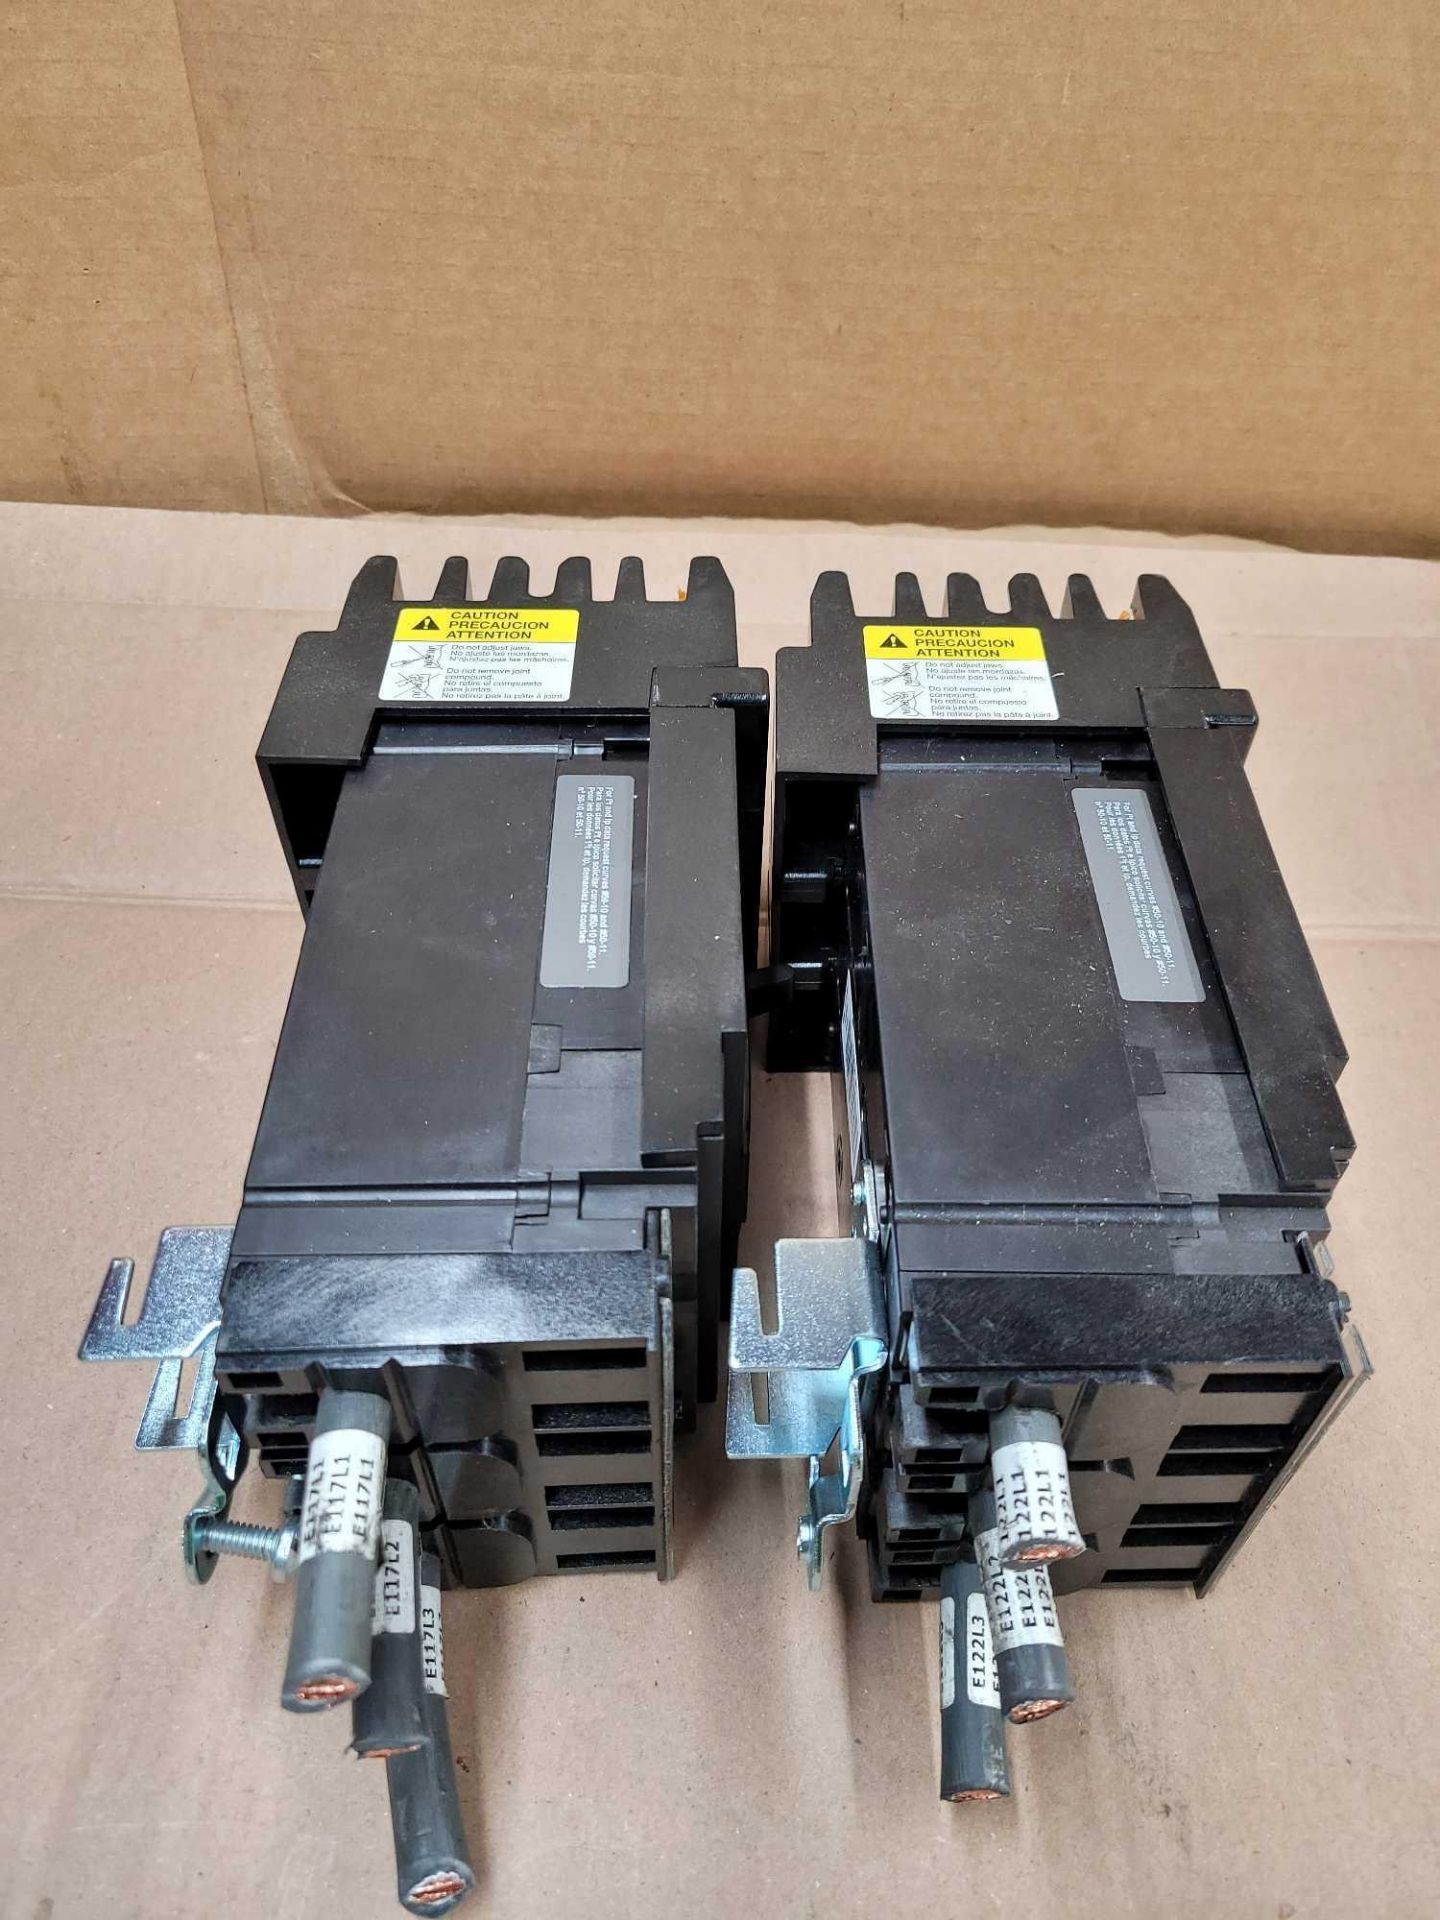 LOT OF 2 SQUARE D HJA36100 / 100 Amp Molded Case Circuit Breaker  /  Lot Weight: 9.6 lbs - Image 3 of 6